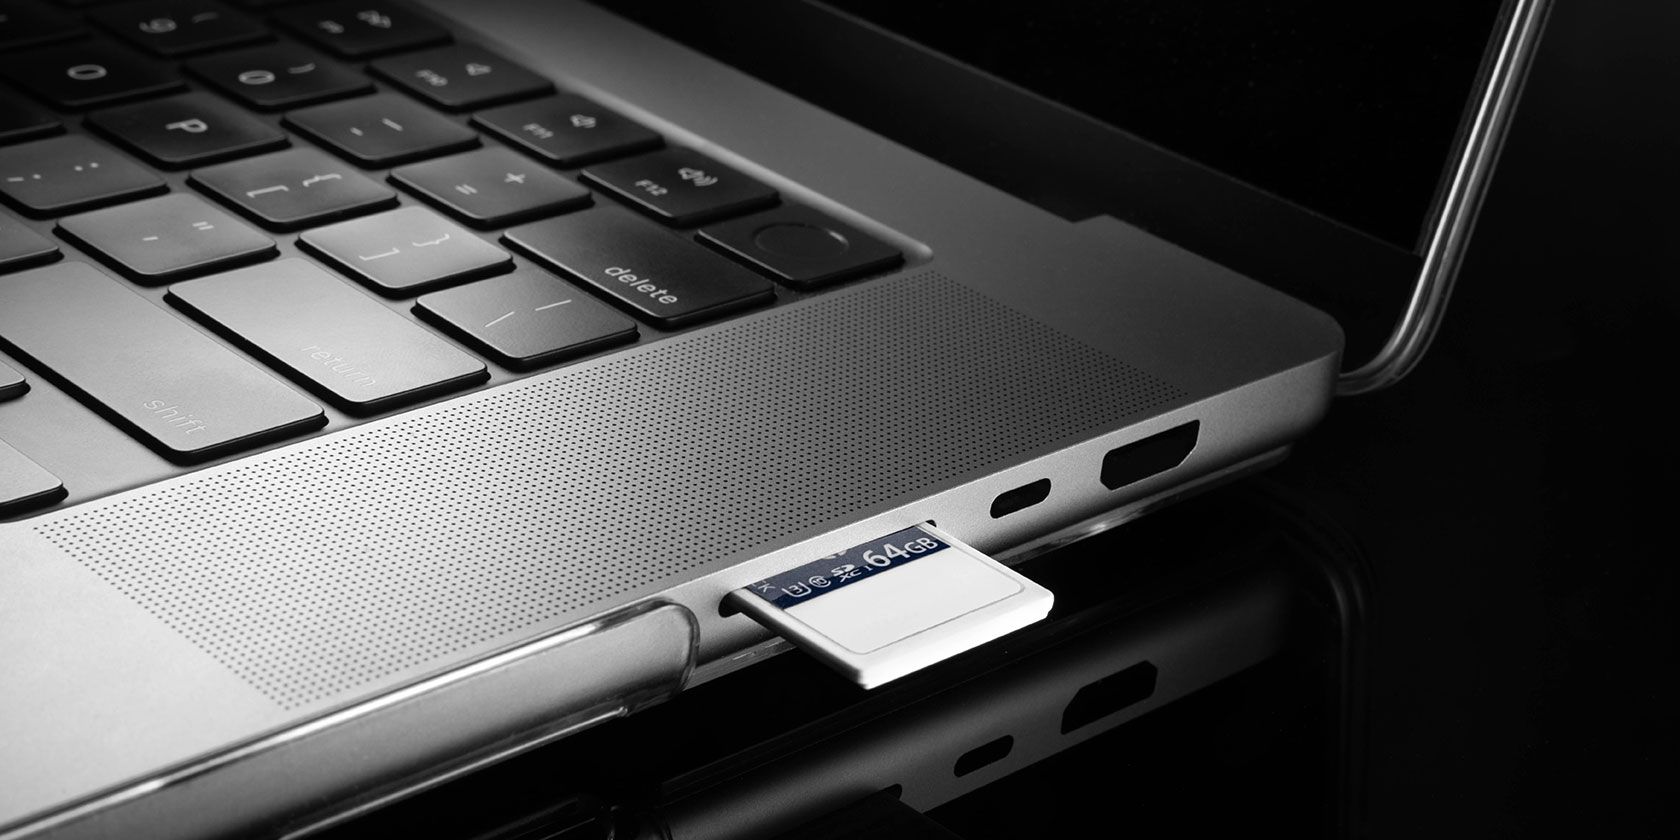 SD card being inserted into laptop slot